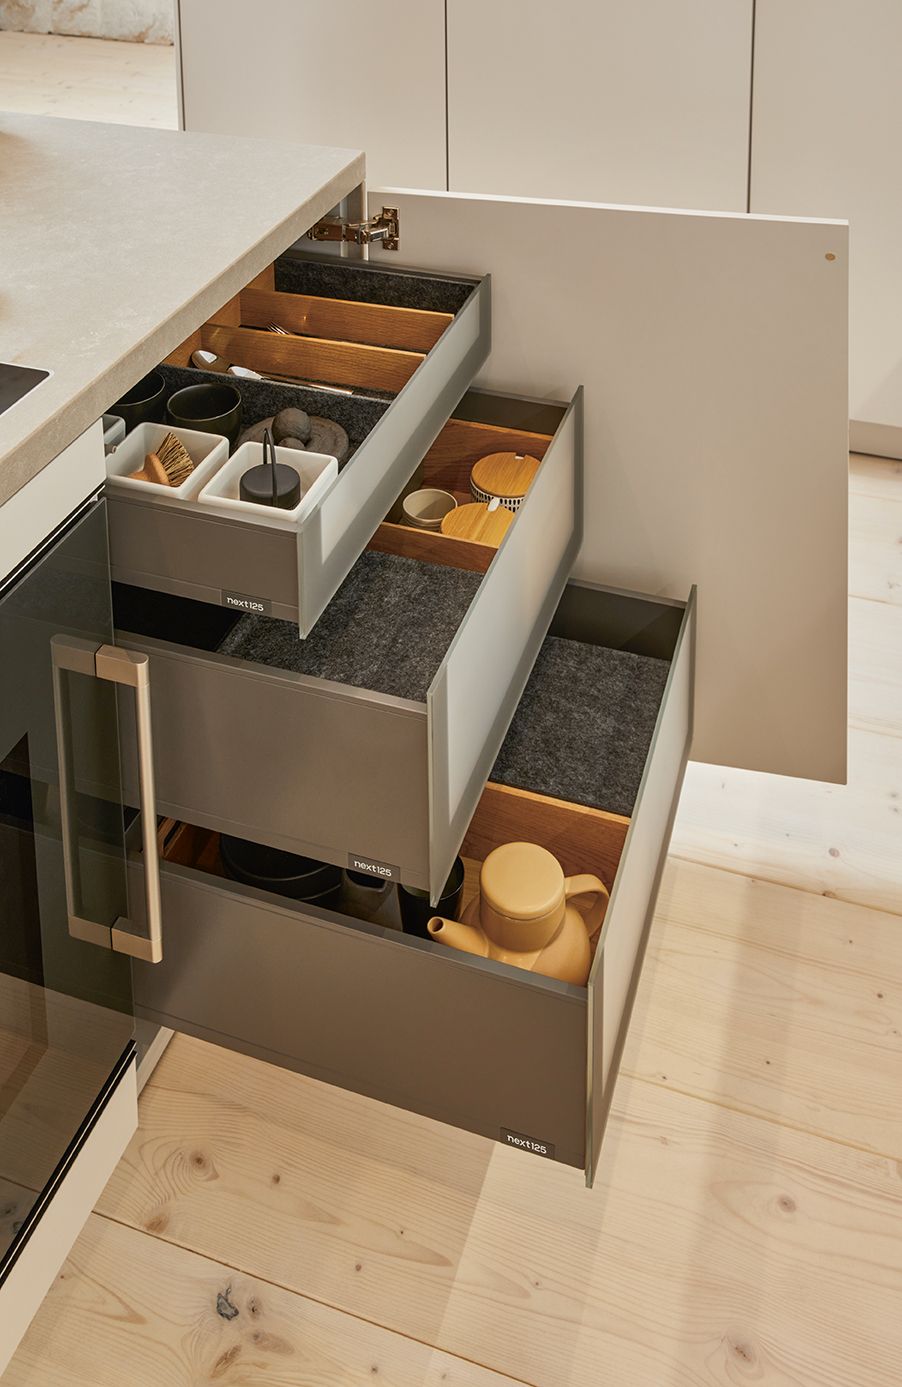 Image of an opened dark next125 base cabinet with interior extractions